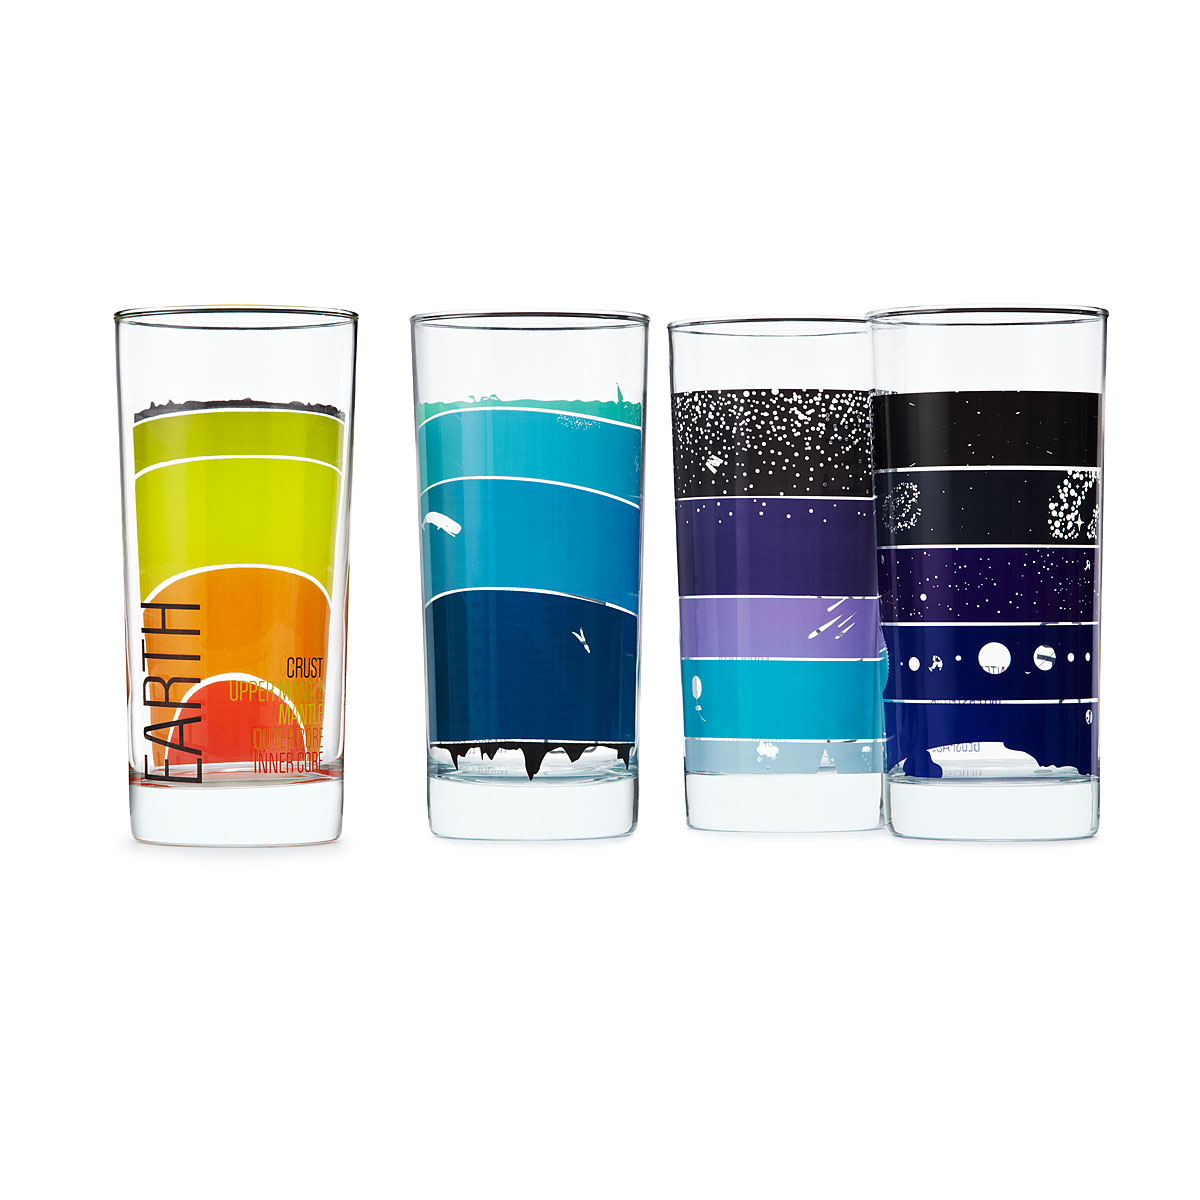 Geek out with these earth science drinking glasses